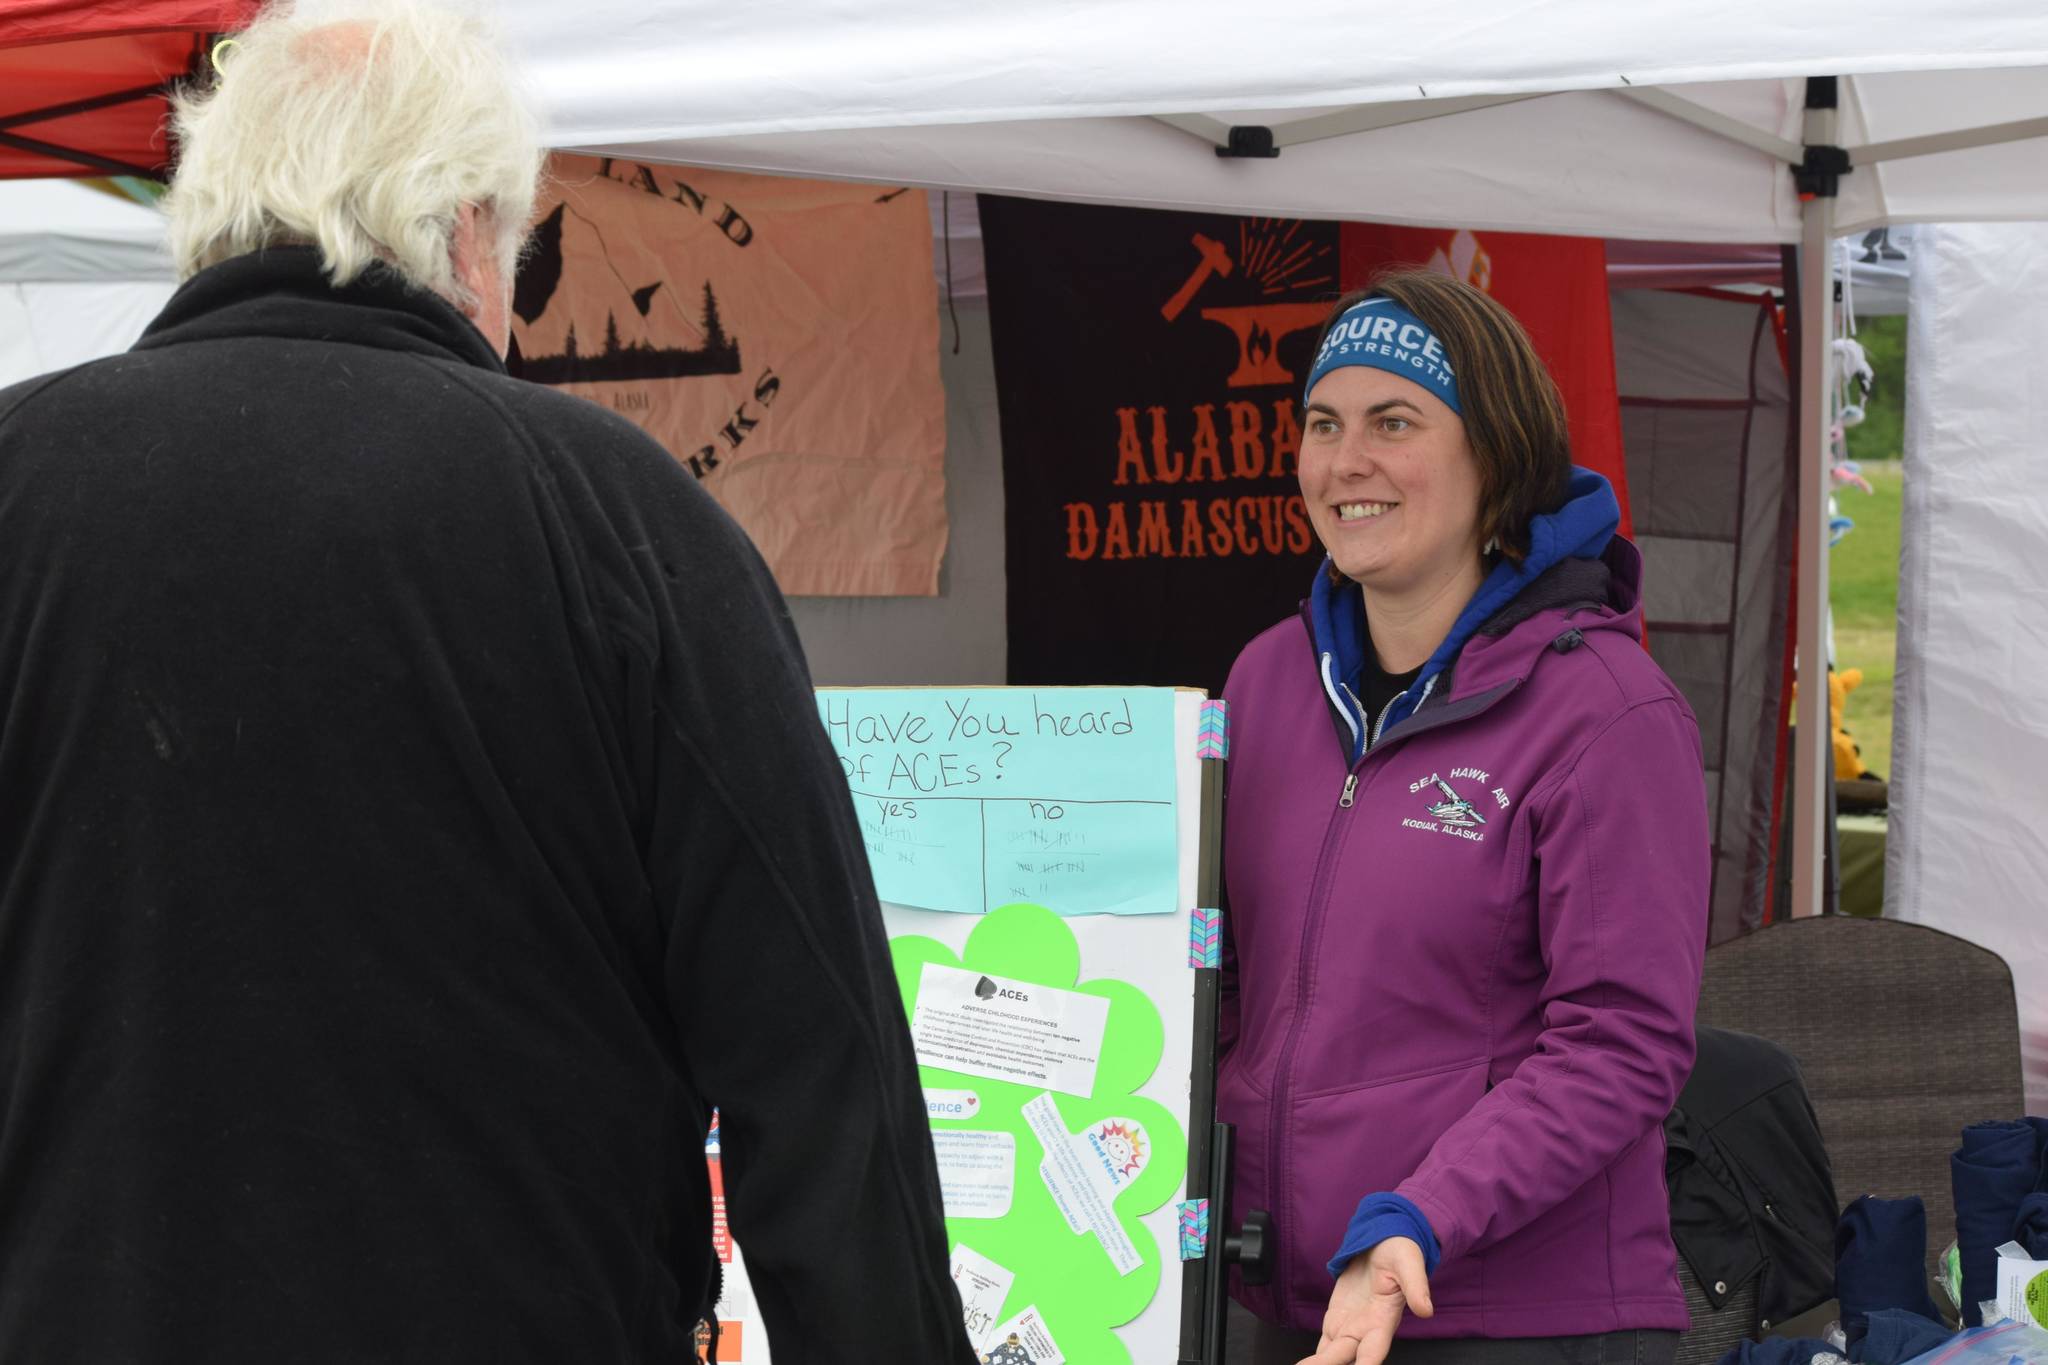 Emily Alvey explains the importance of trauma and adverse childhood experience awareness in her booth at the Soldotna Creek Park Wednesday Market on June 23, 2021. (Camille Botello/Peninsula Clarion)